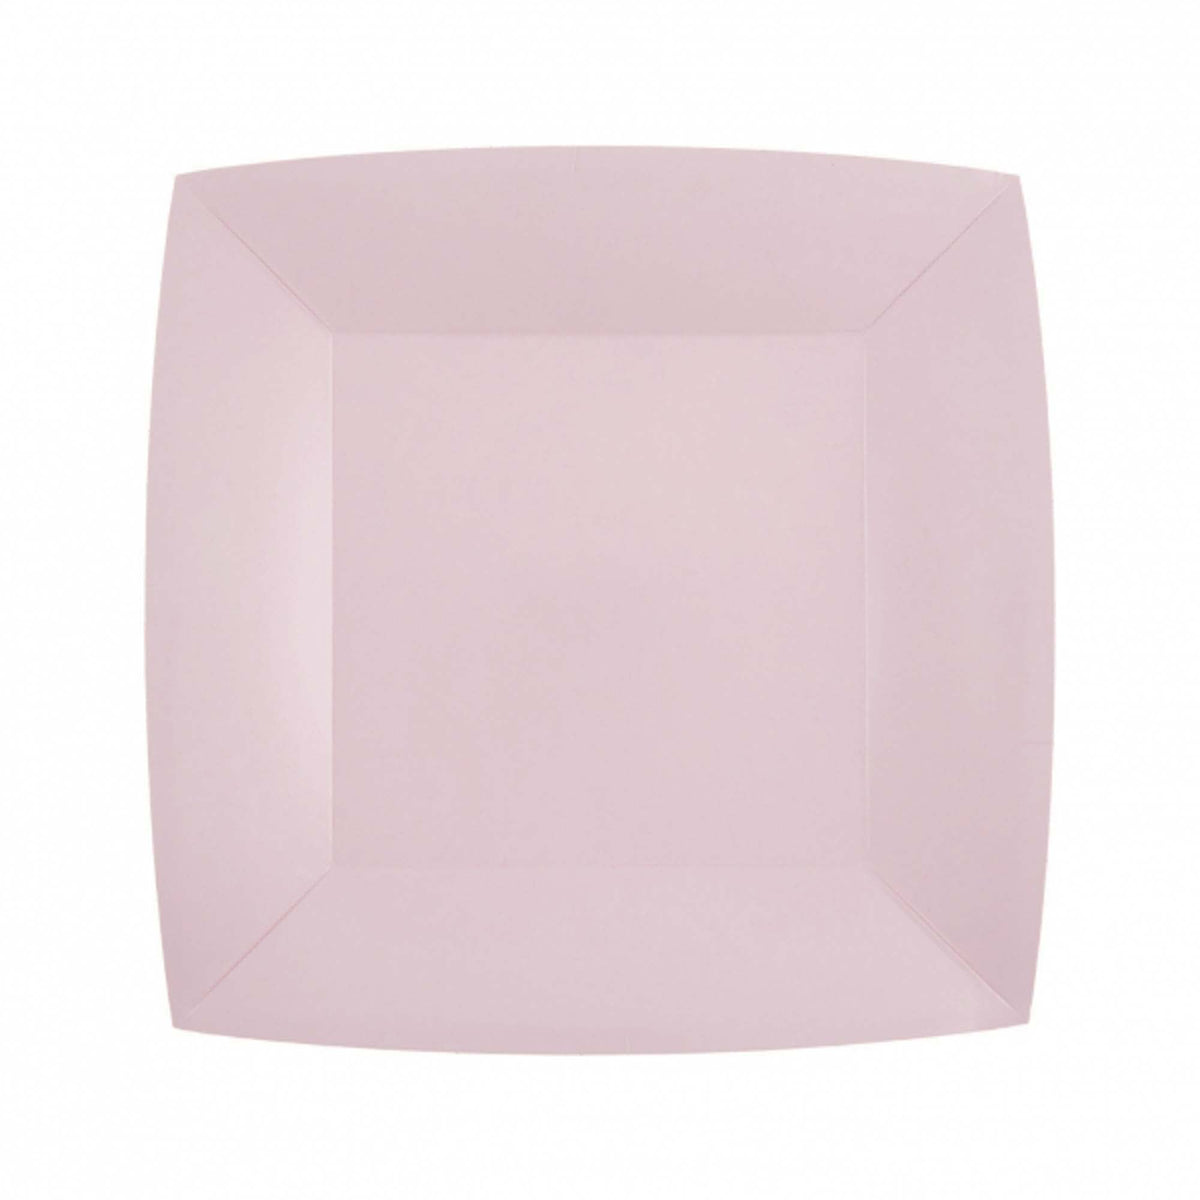 SANTEX Everyday Entertaining Light Pink Small Square Dessert Party Paper Plates, 7 Inches, 10 Count 3660380071860